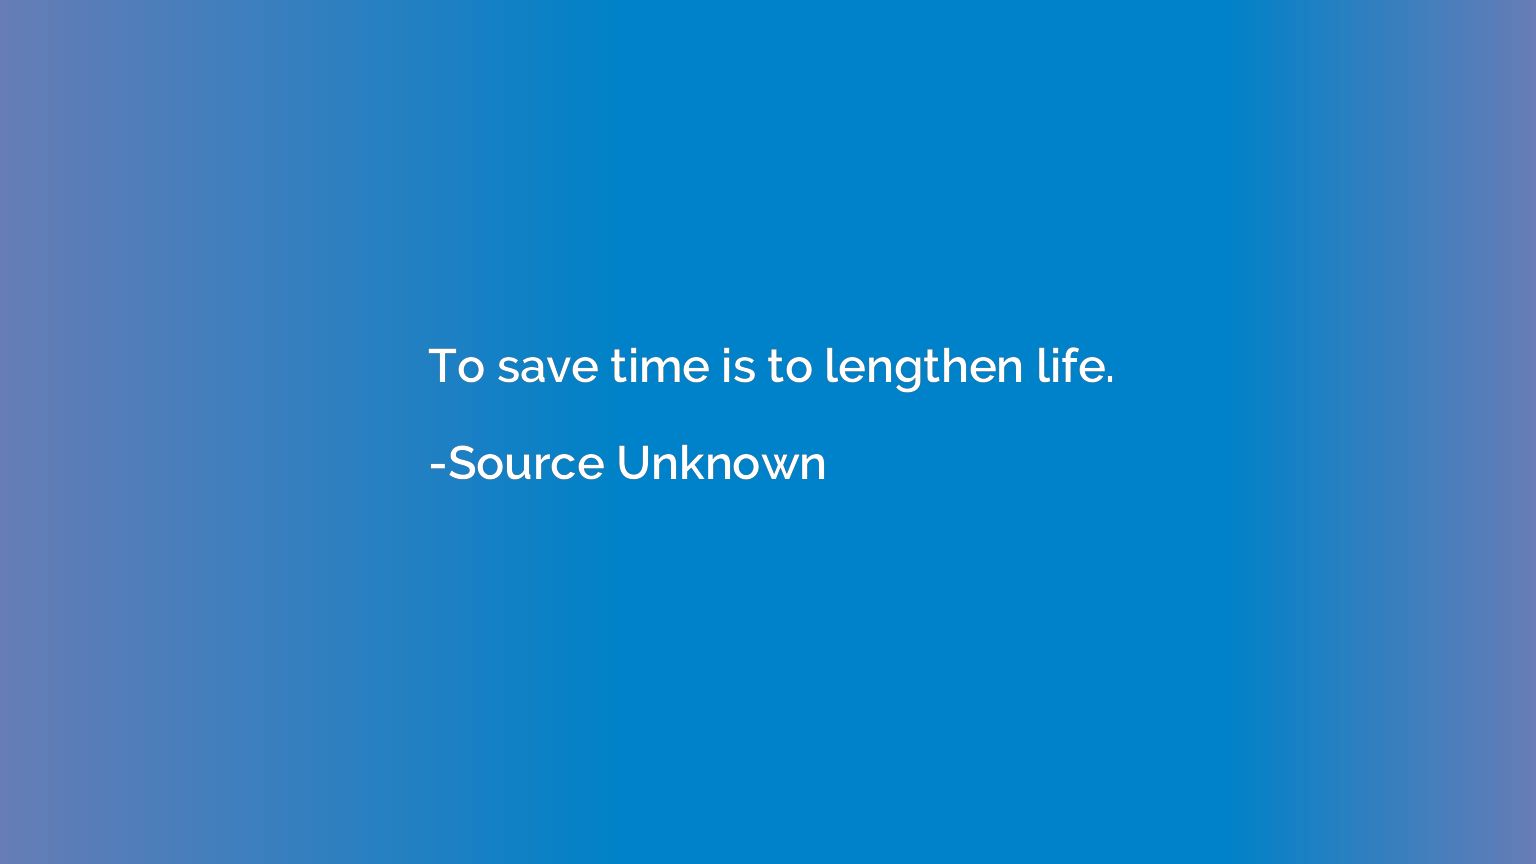 To save time is to lengthen life.